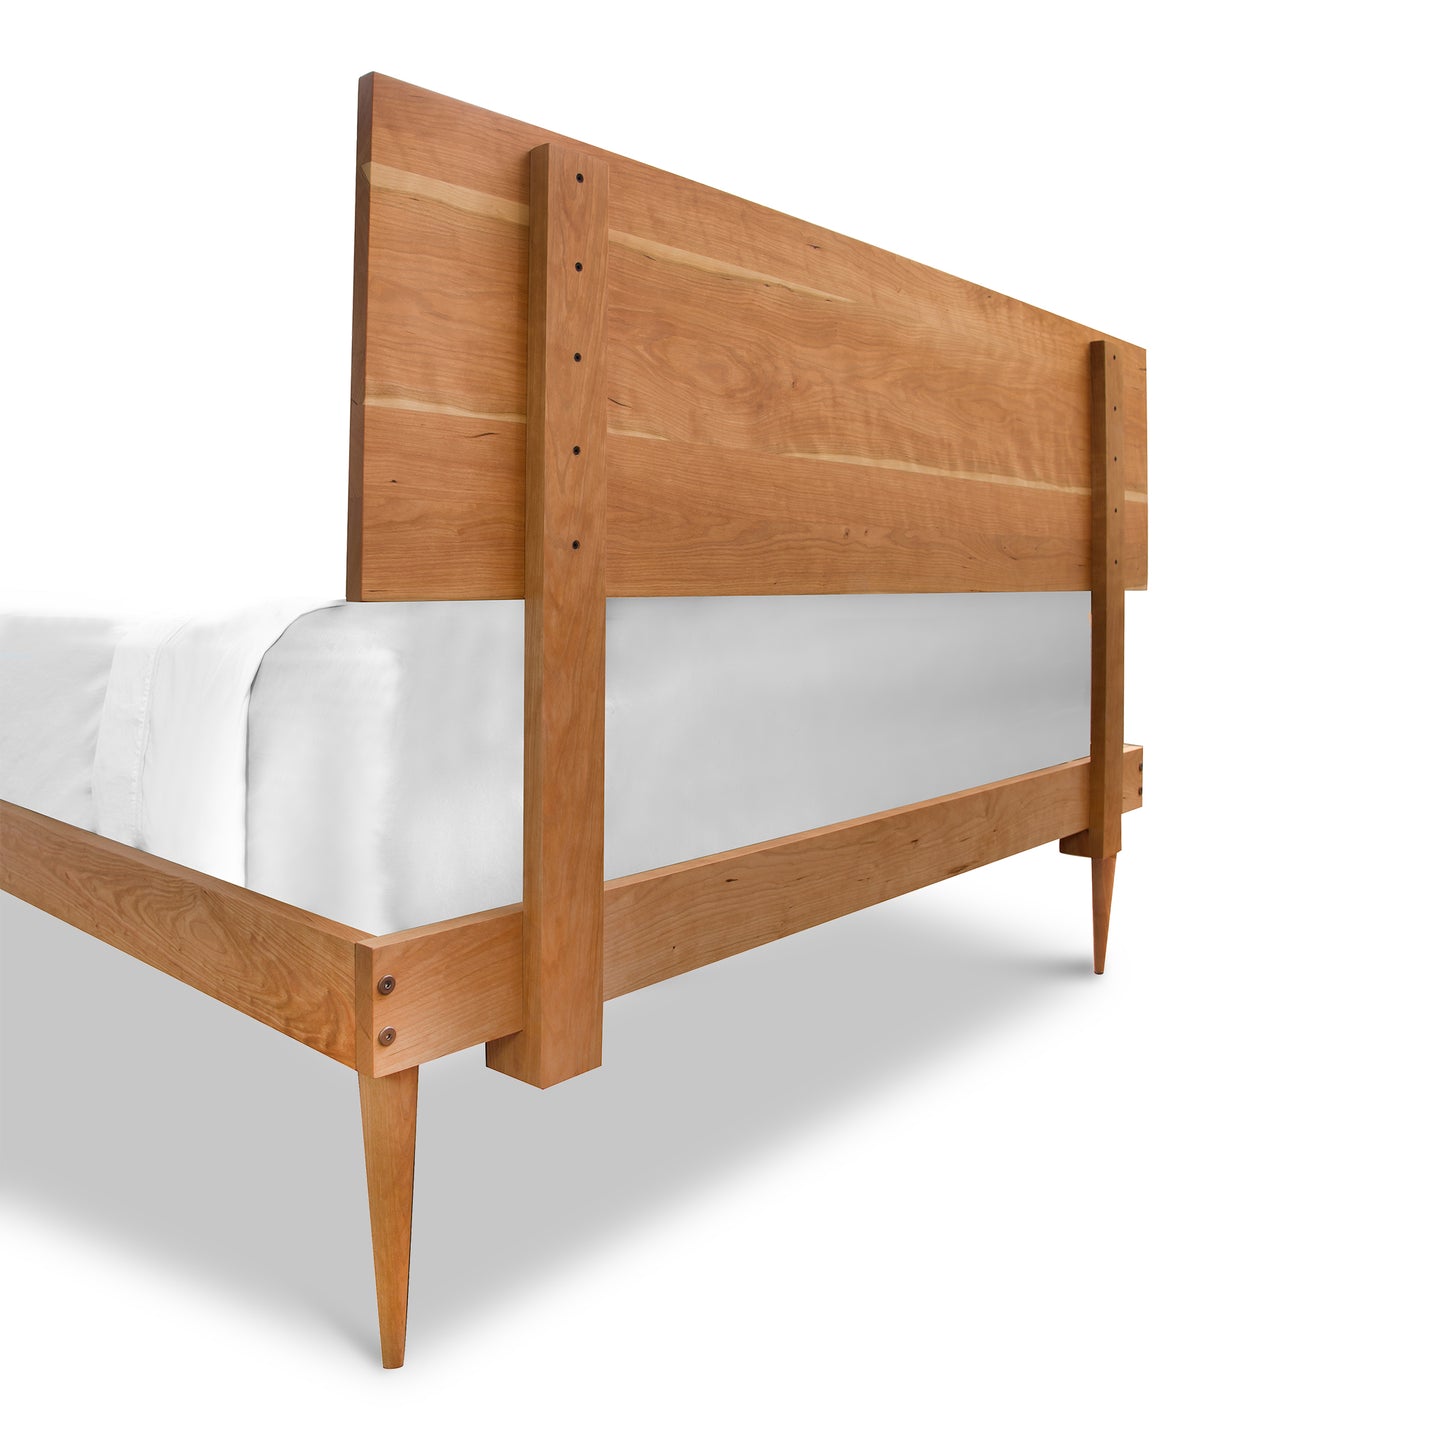 A natural cherry Vermont Furniture Designs Larssen Bed frame with a white sheet on a white background.